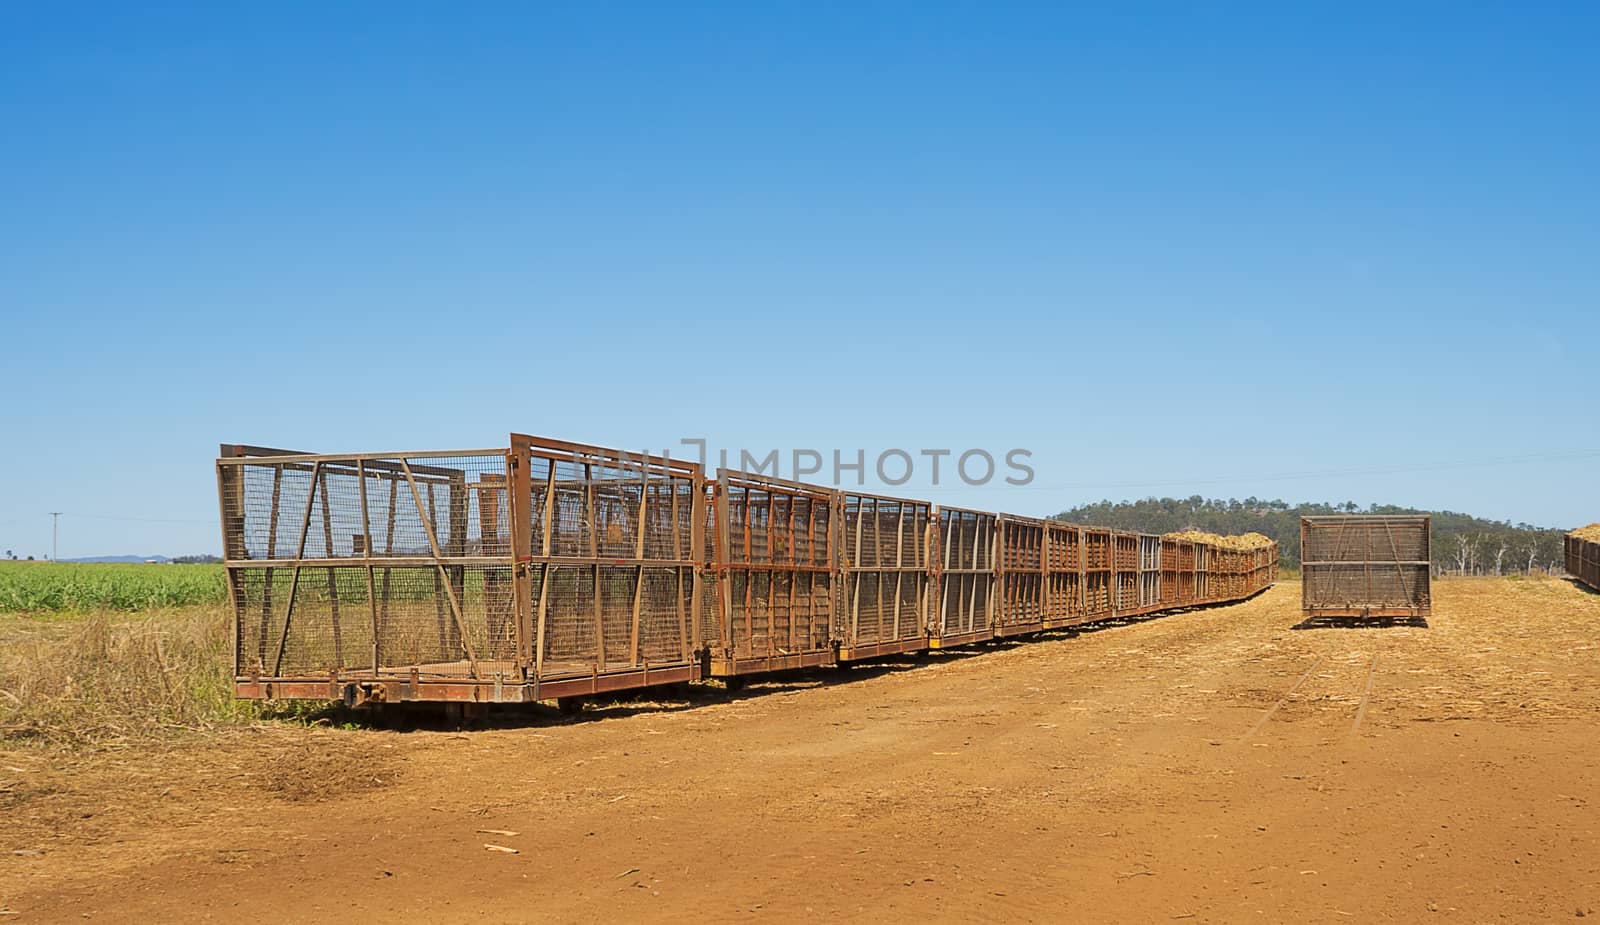 Australian rural scene countryside with cane train carriages on a sugarcane plantation